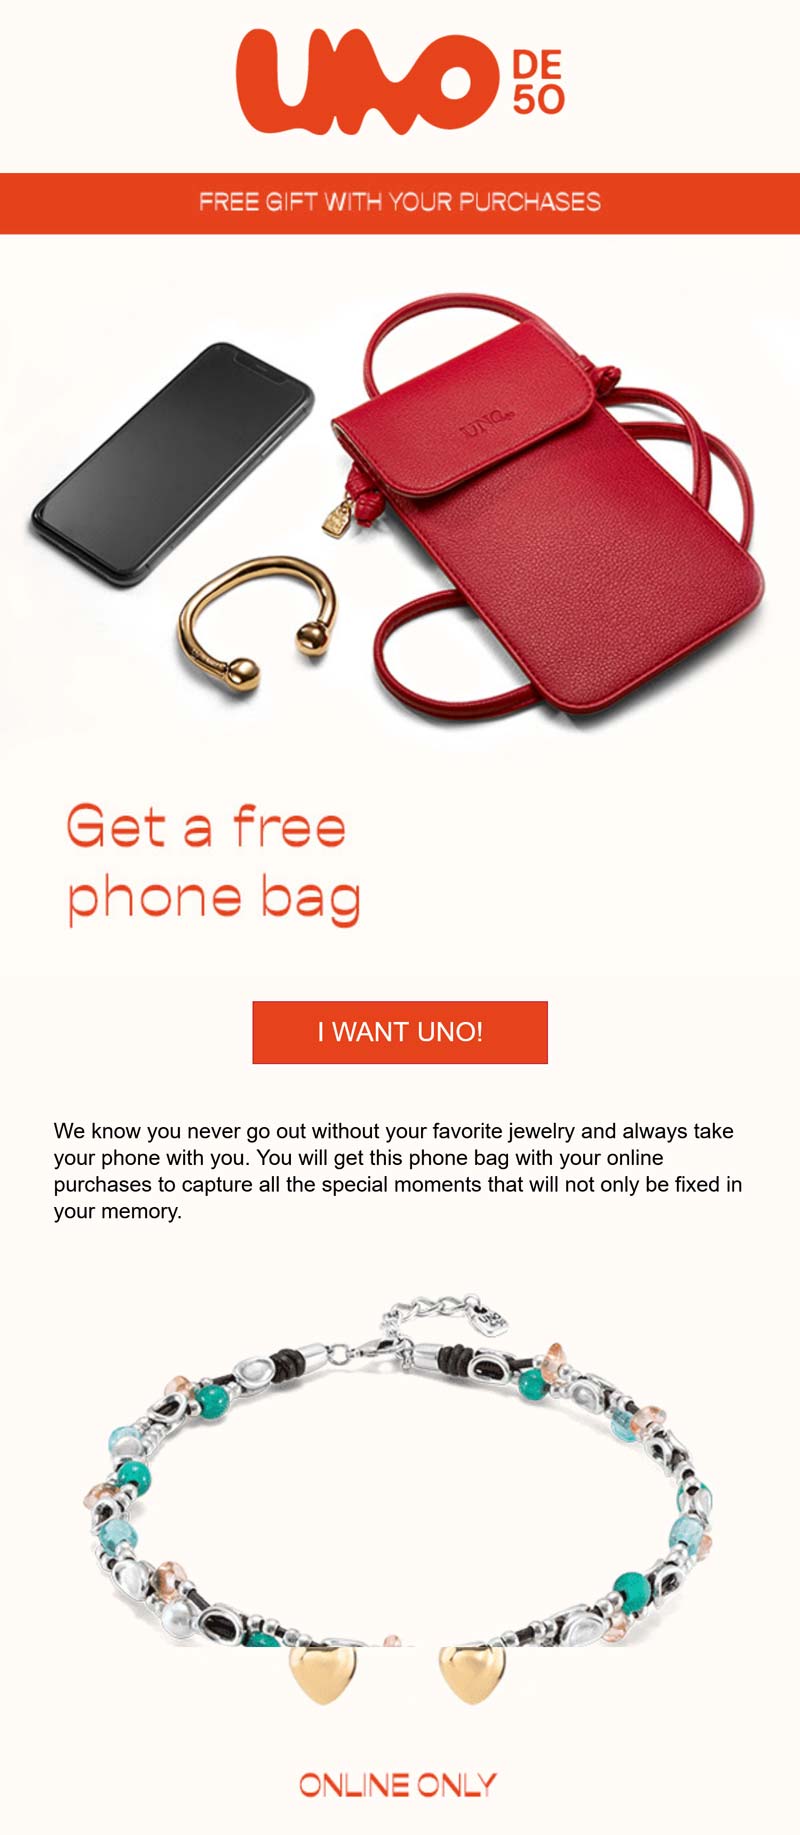 UNOde50 stores Coupon  Free phone bag with your online purchase at UNOde50 #unode50 